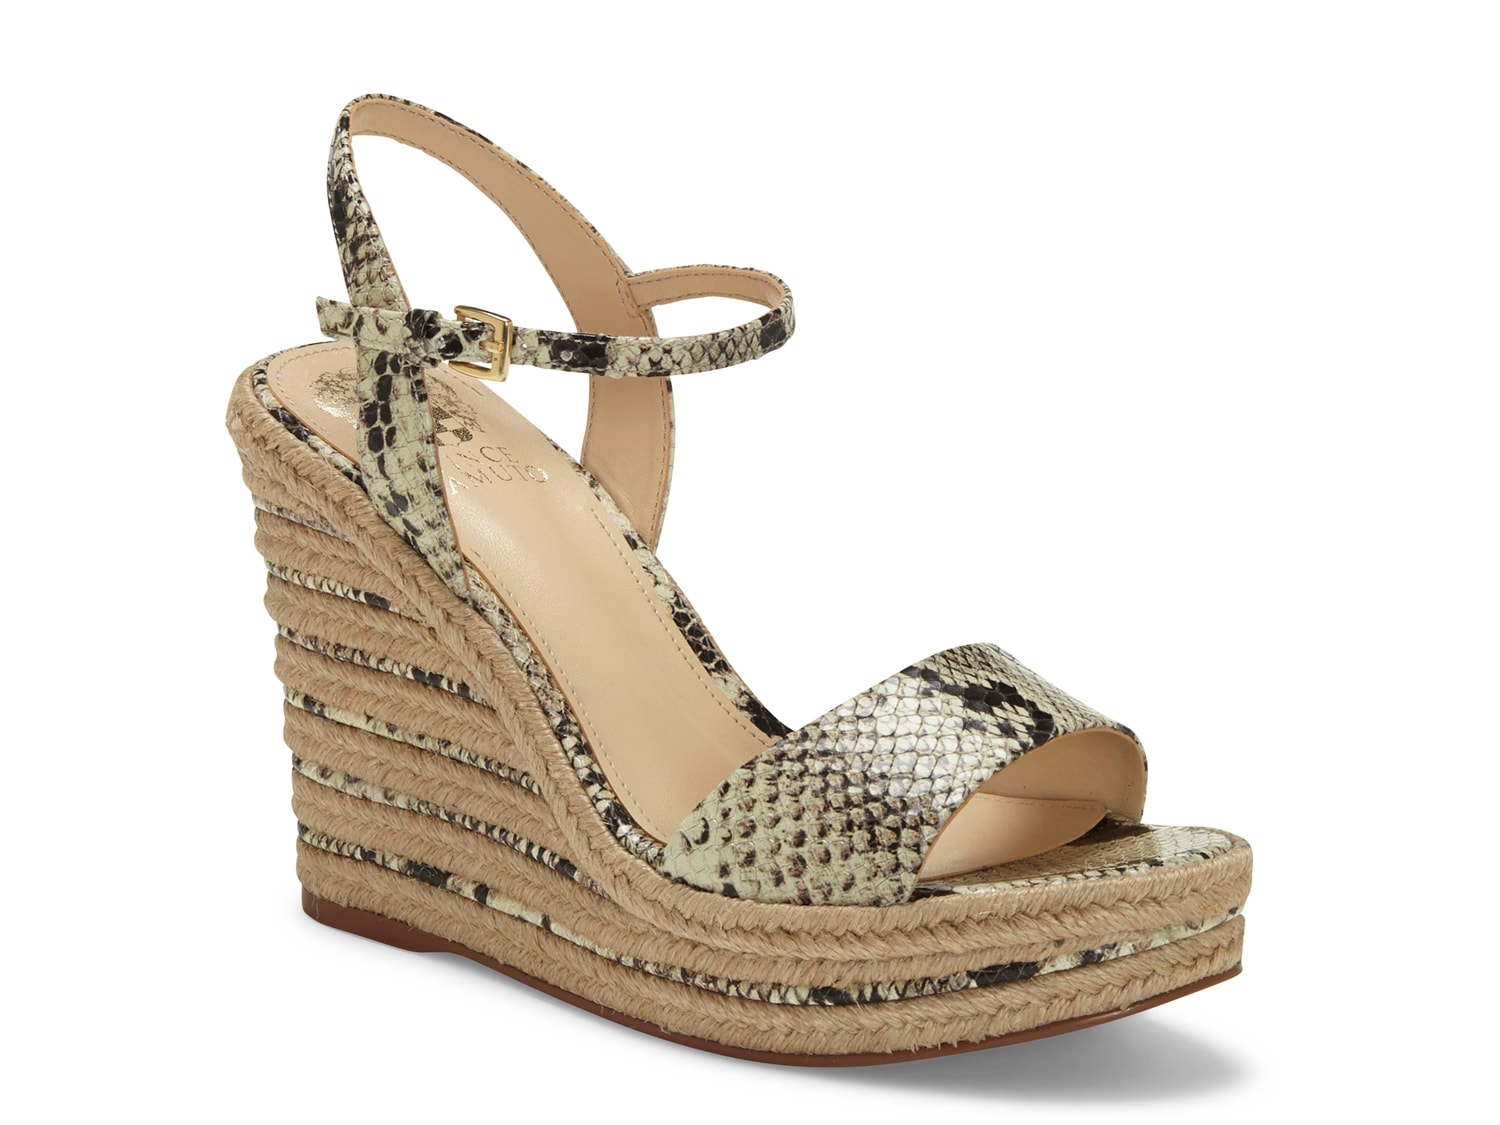 Vince Camuto Marybell Wedge Sandal - Free Shipping | DSW